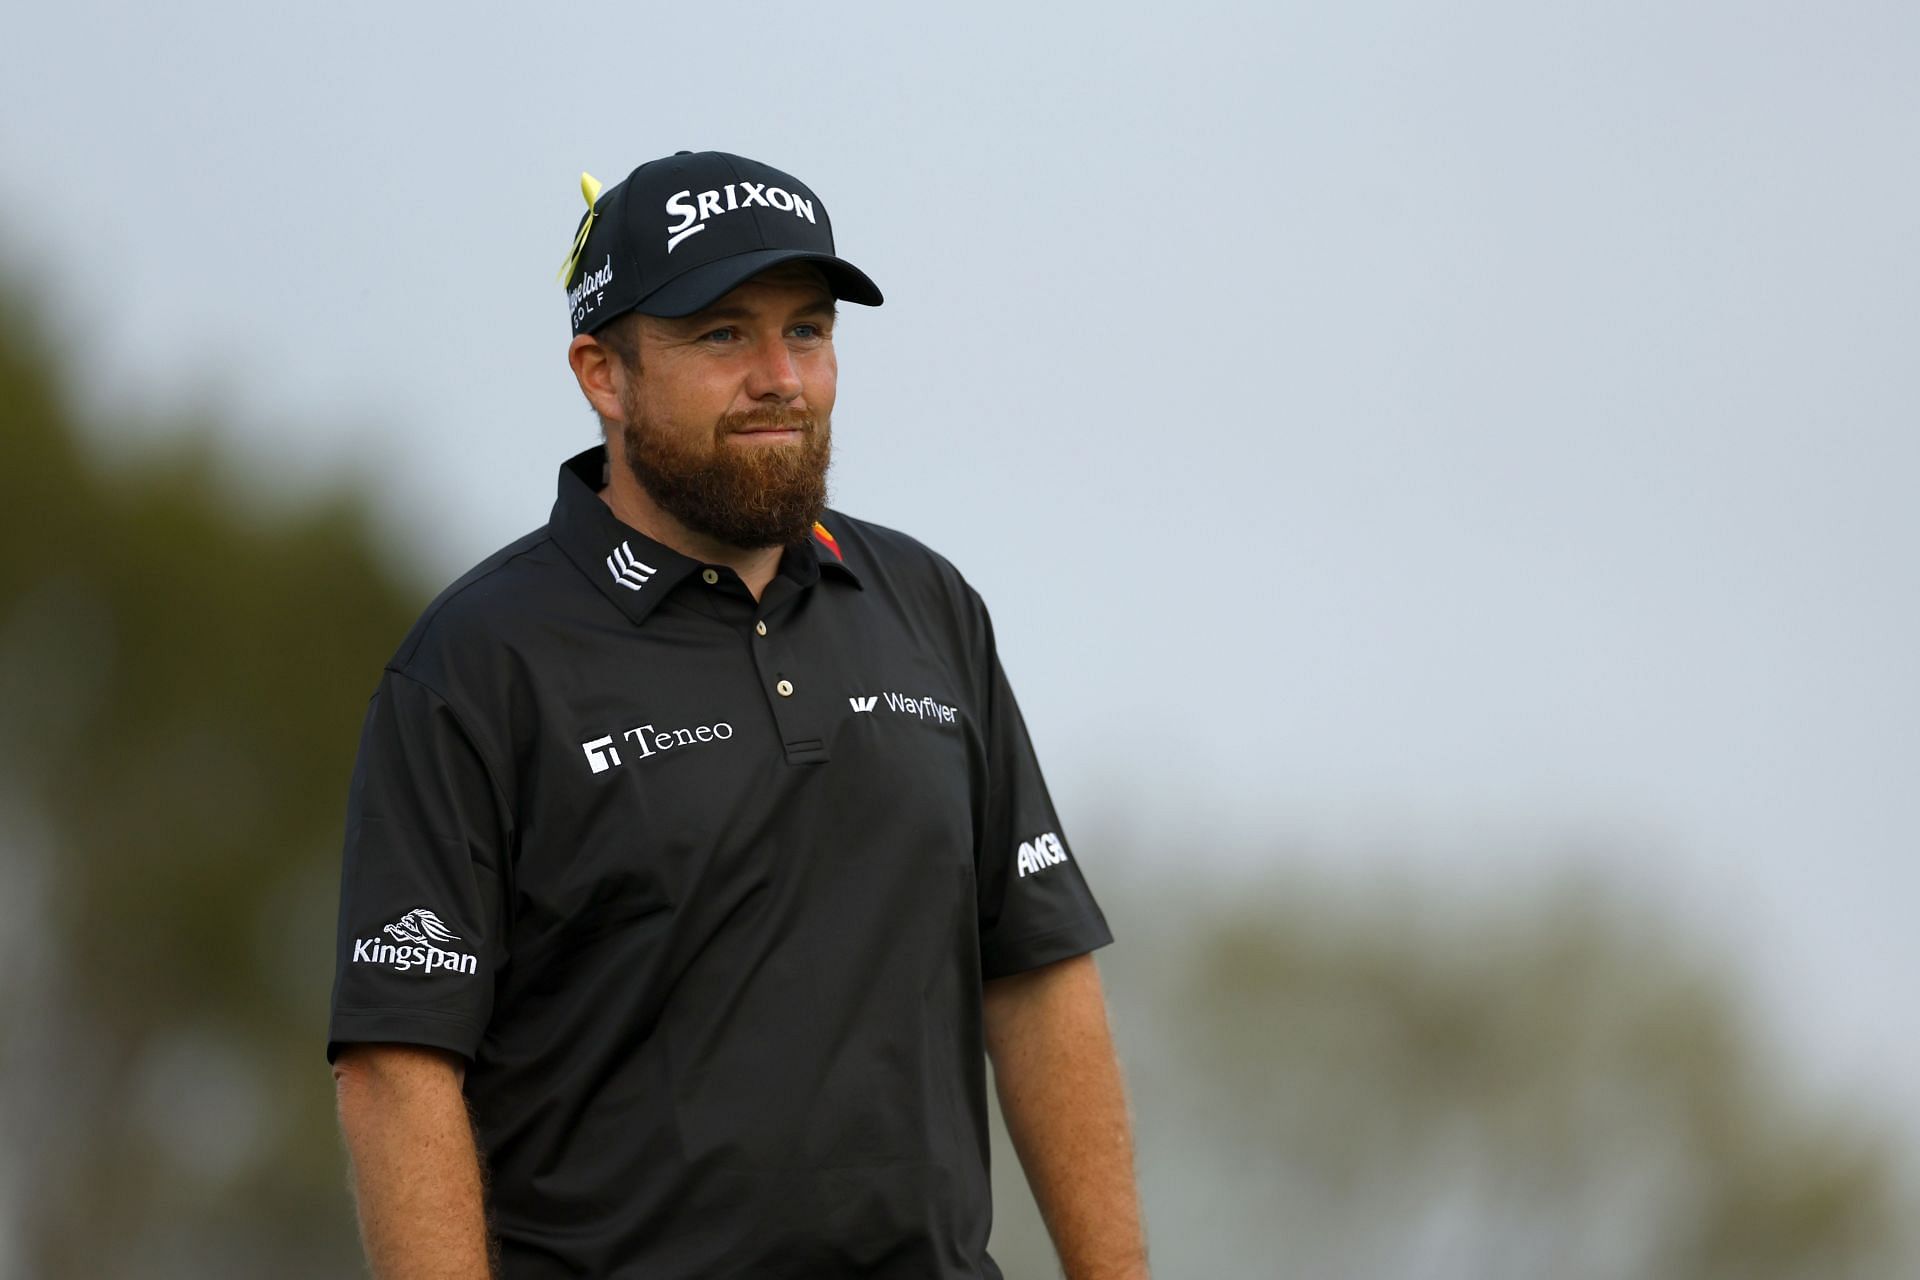 Shane Lowry did pretty well overall at the Arnold Palmer Invitational